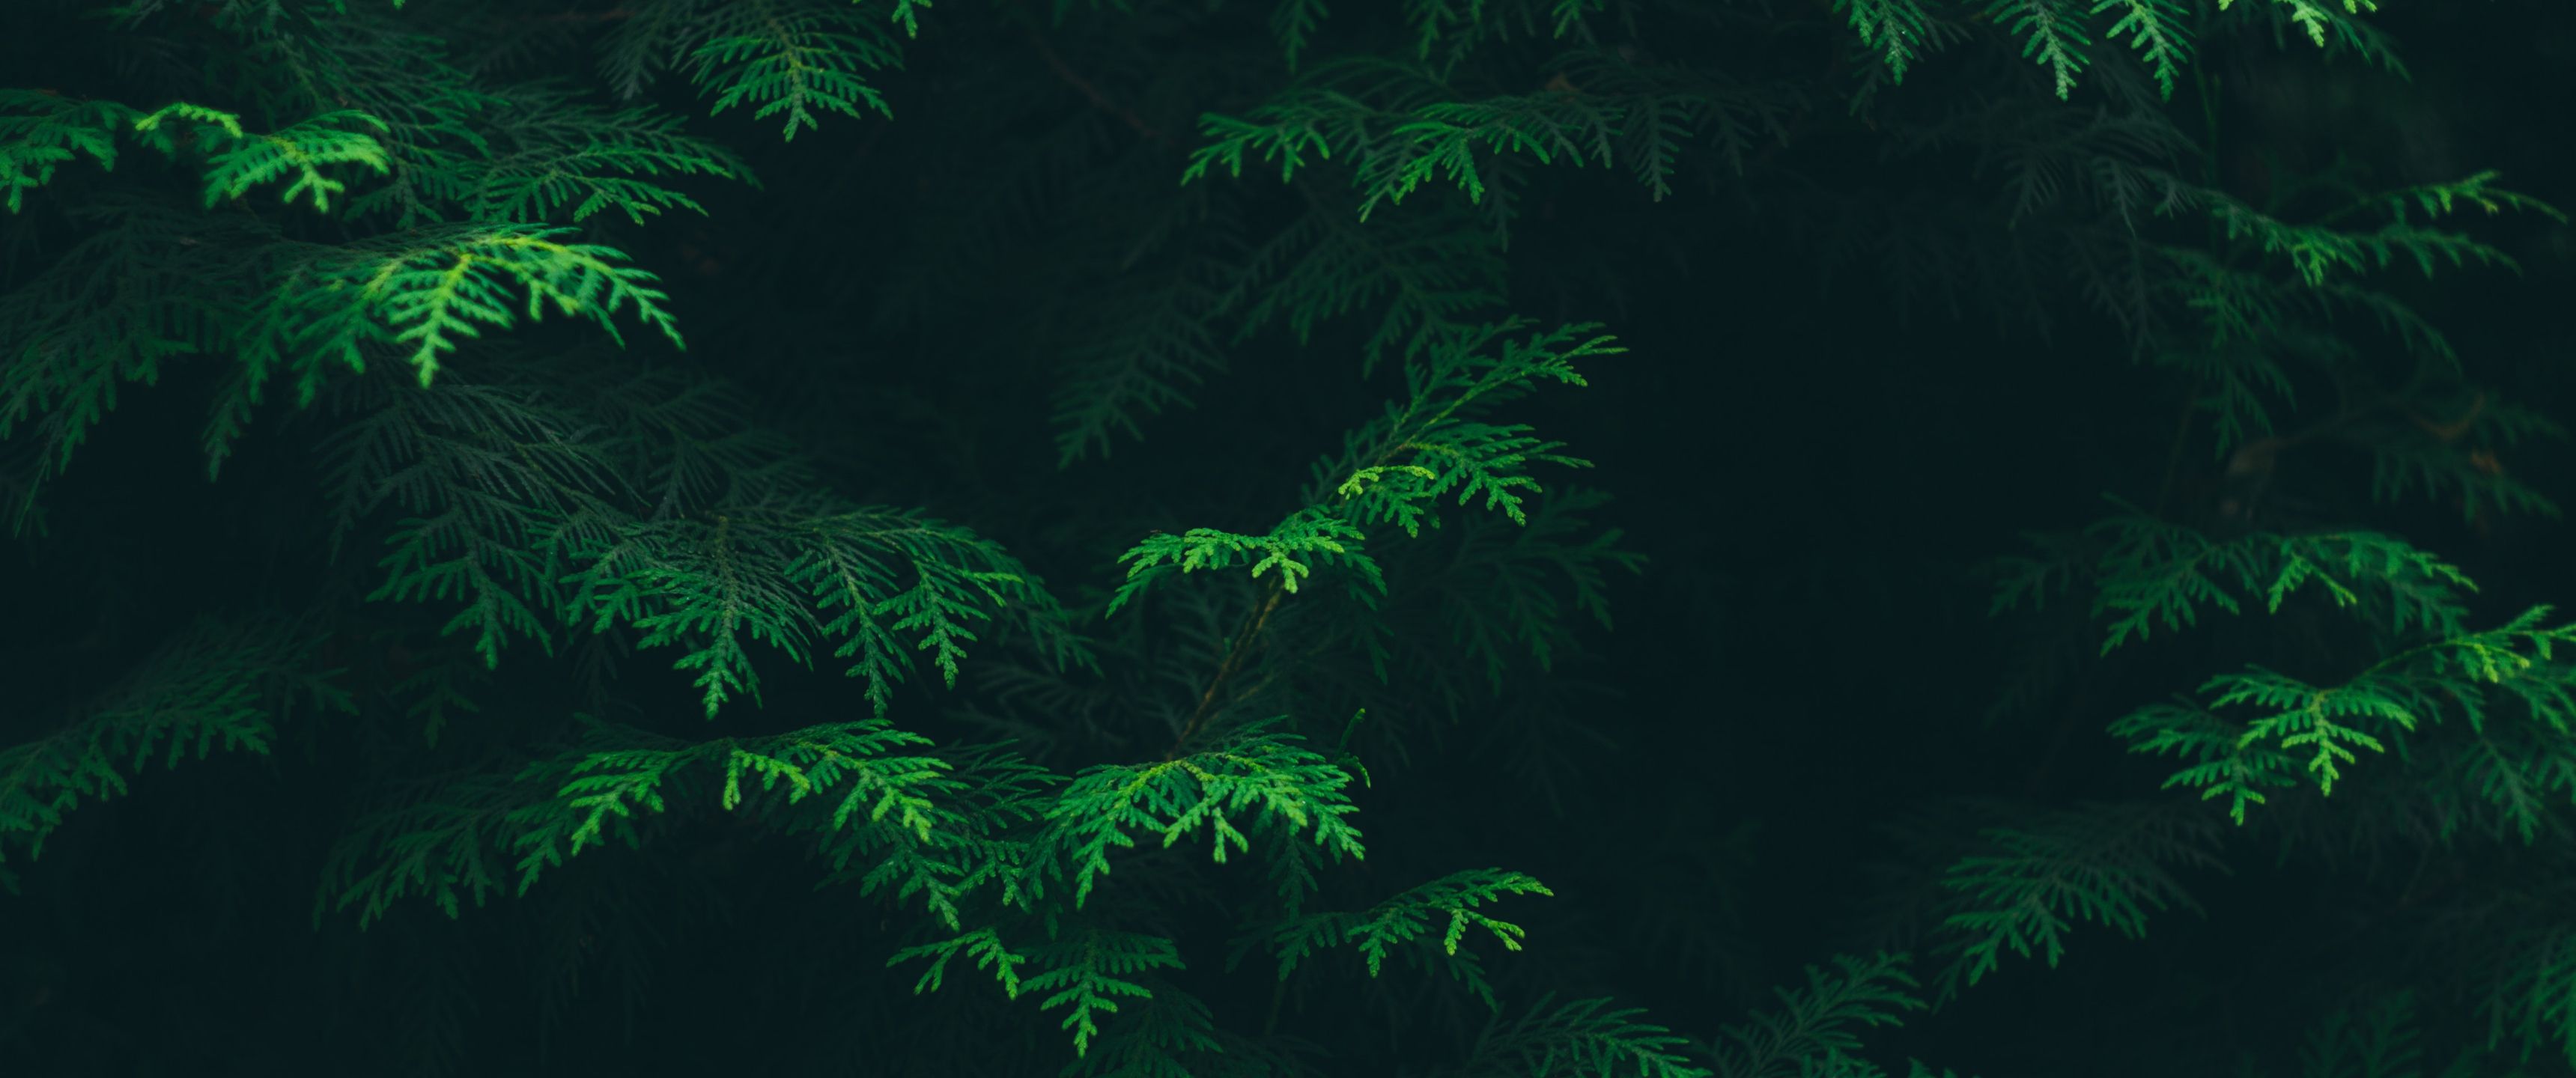 A close up of green leaves on a tree. - 3440x1440